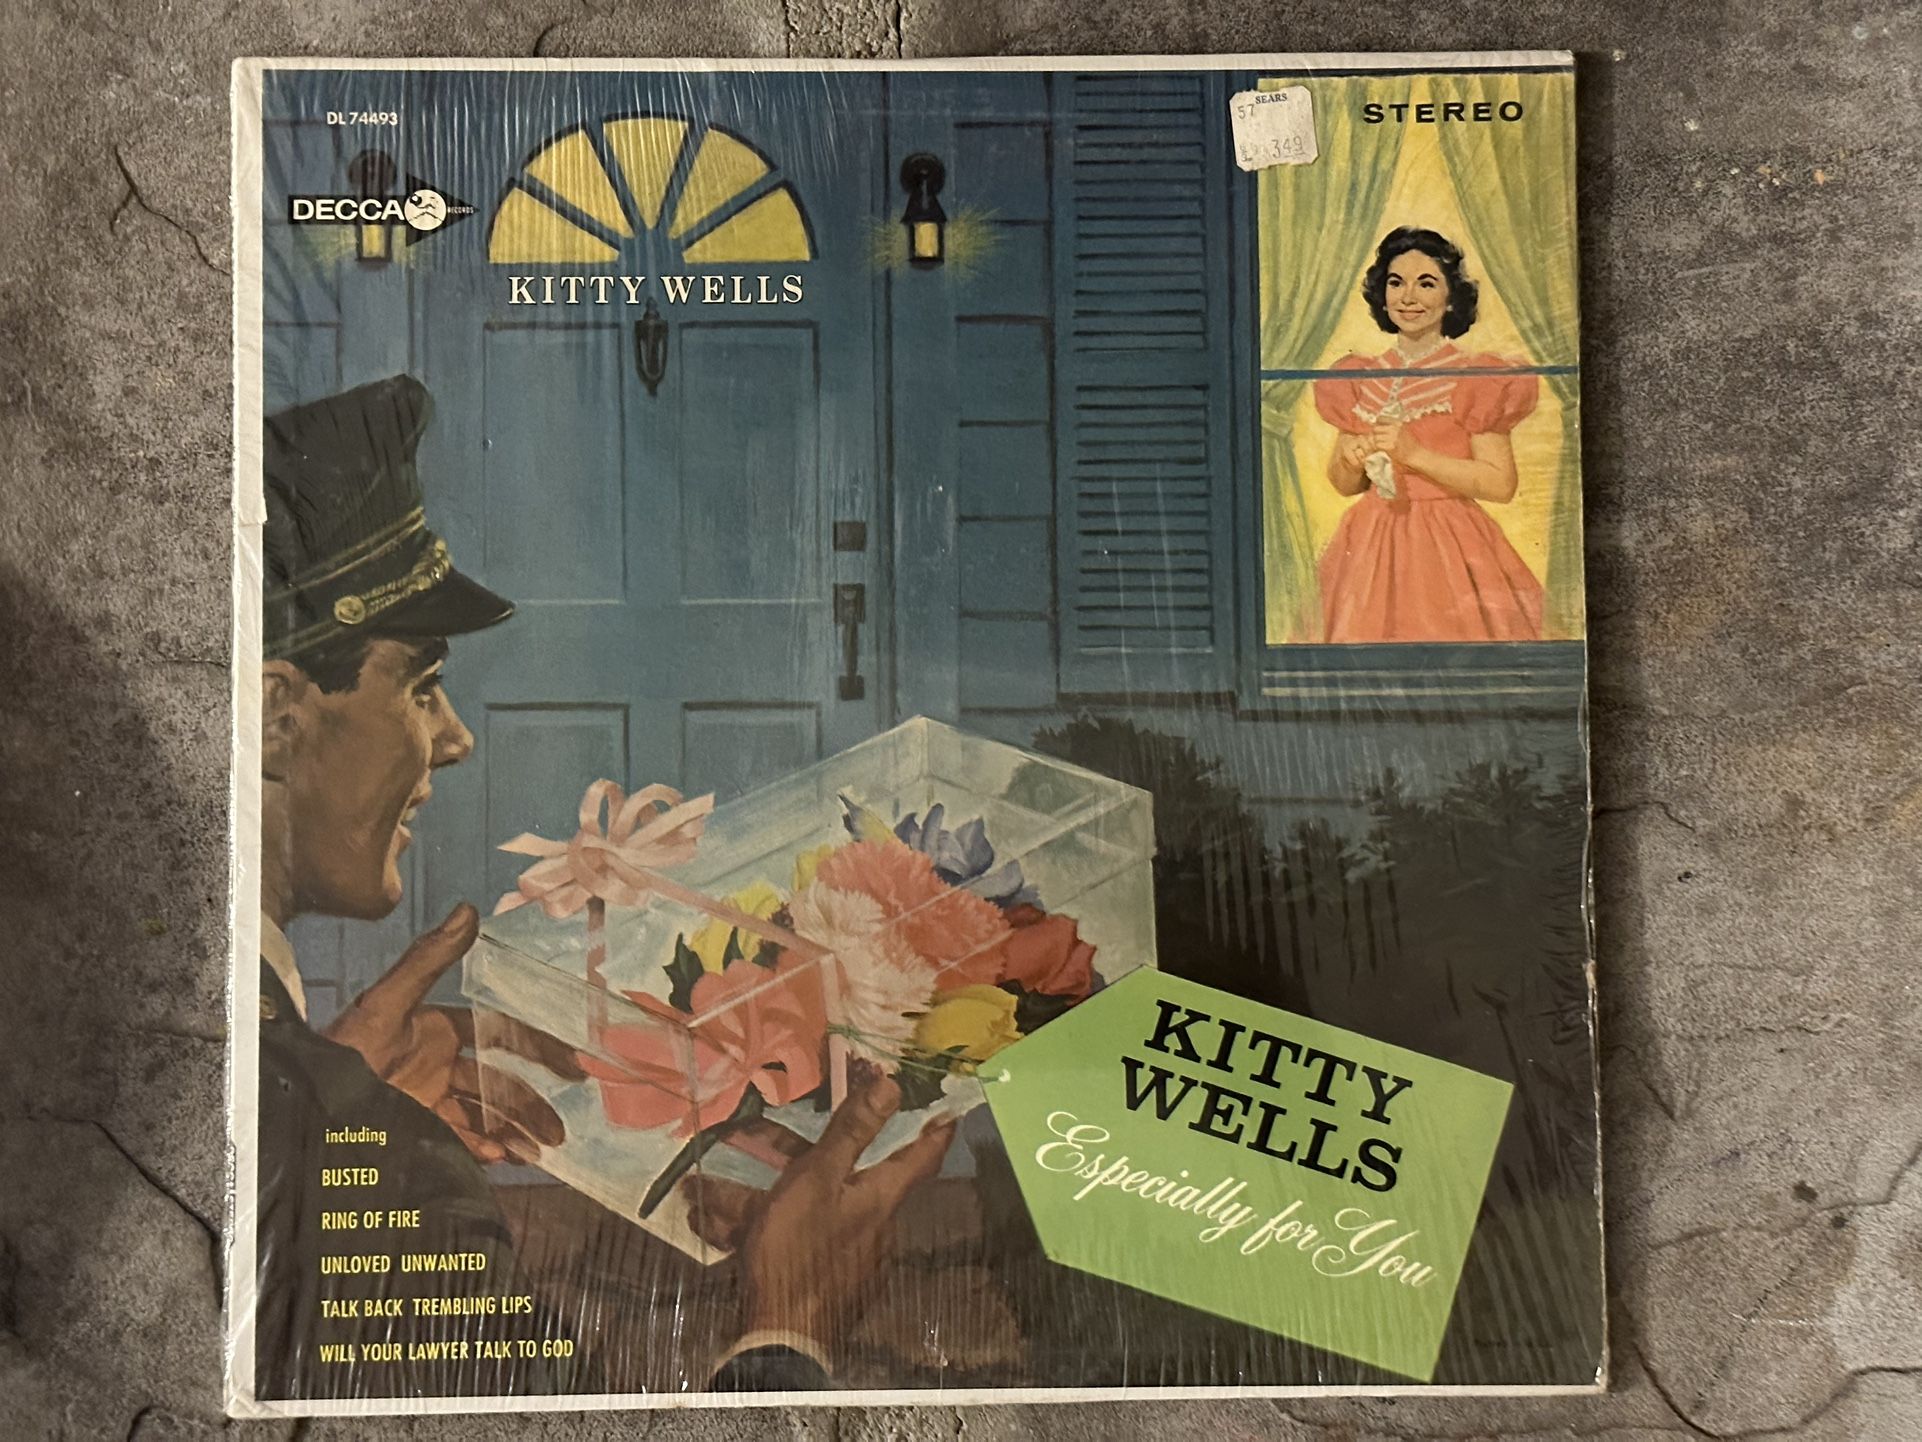 Kitty Wells - Especially For You Lp vinyl record album. Vintage. Play tested great.